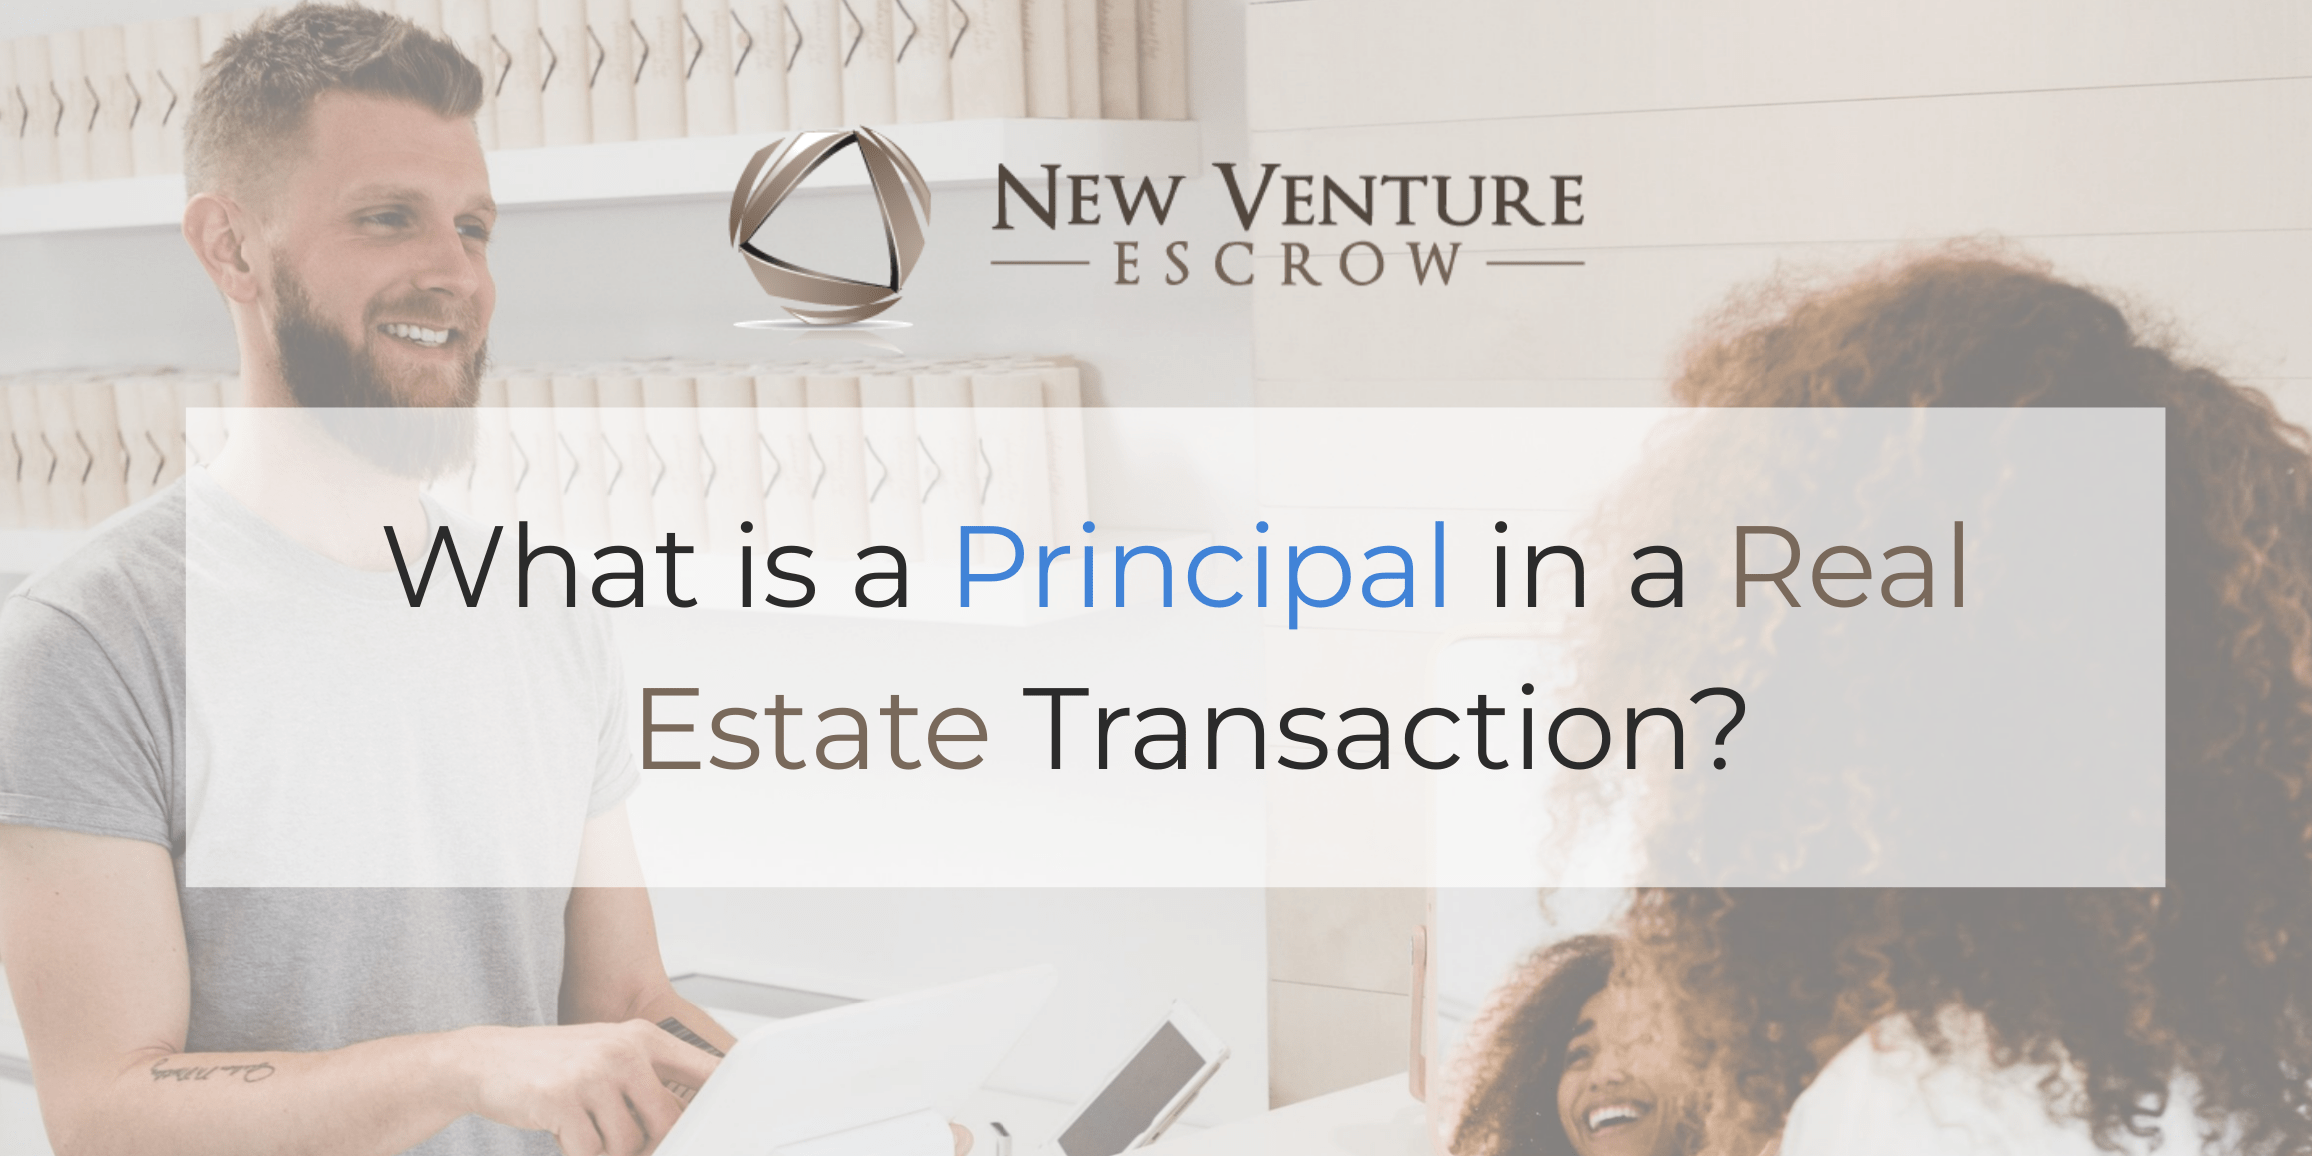 What is the definition of a principal real estate